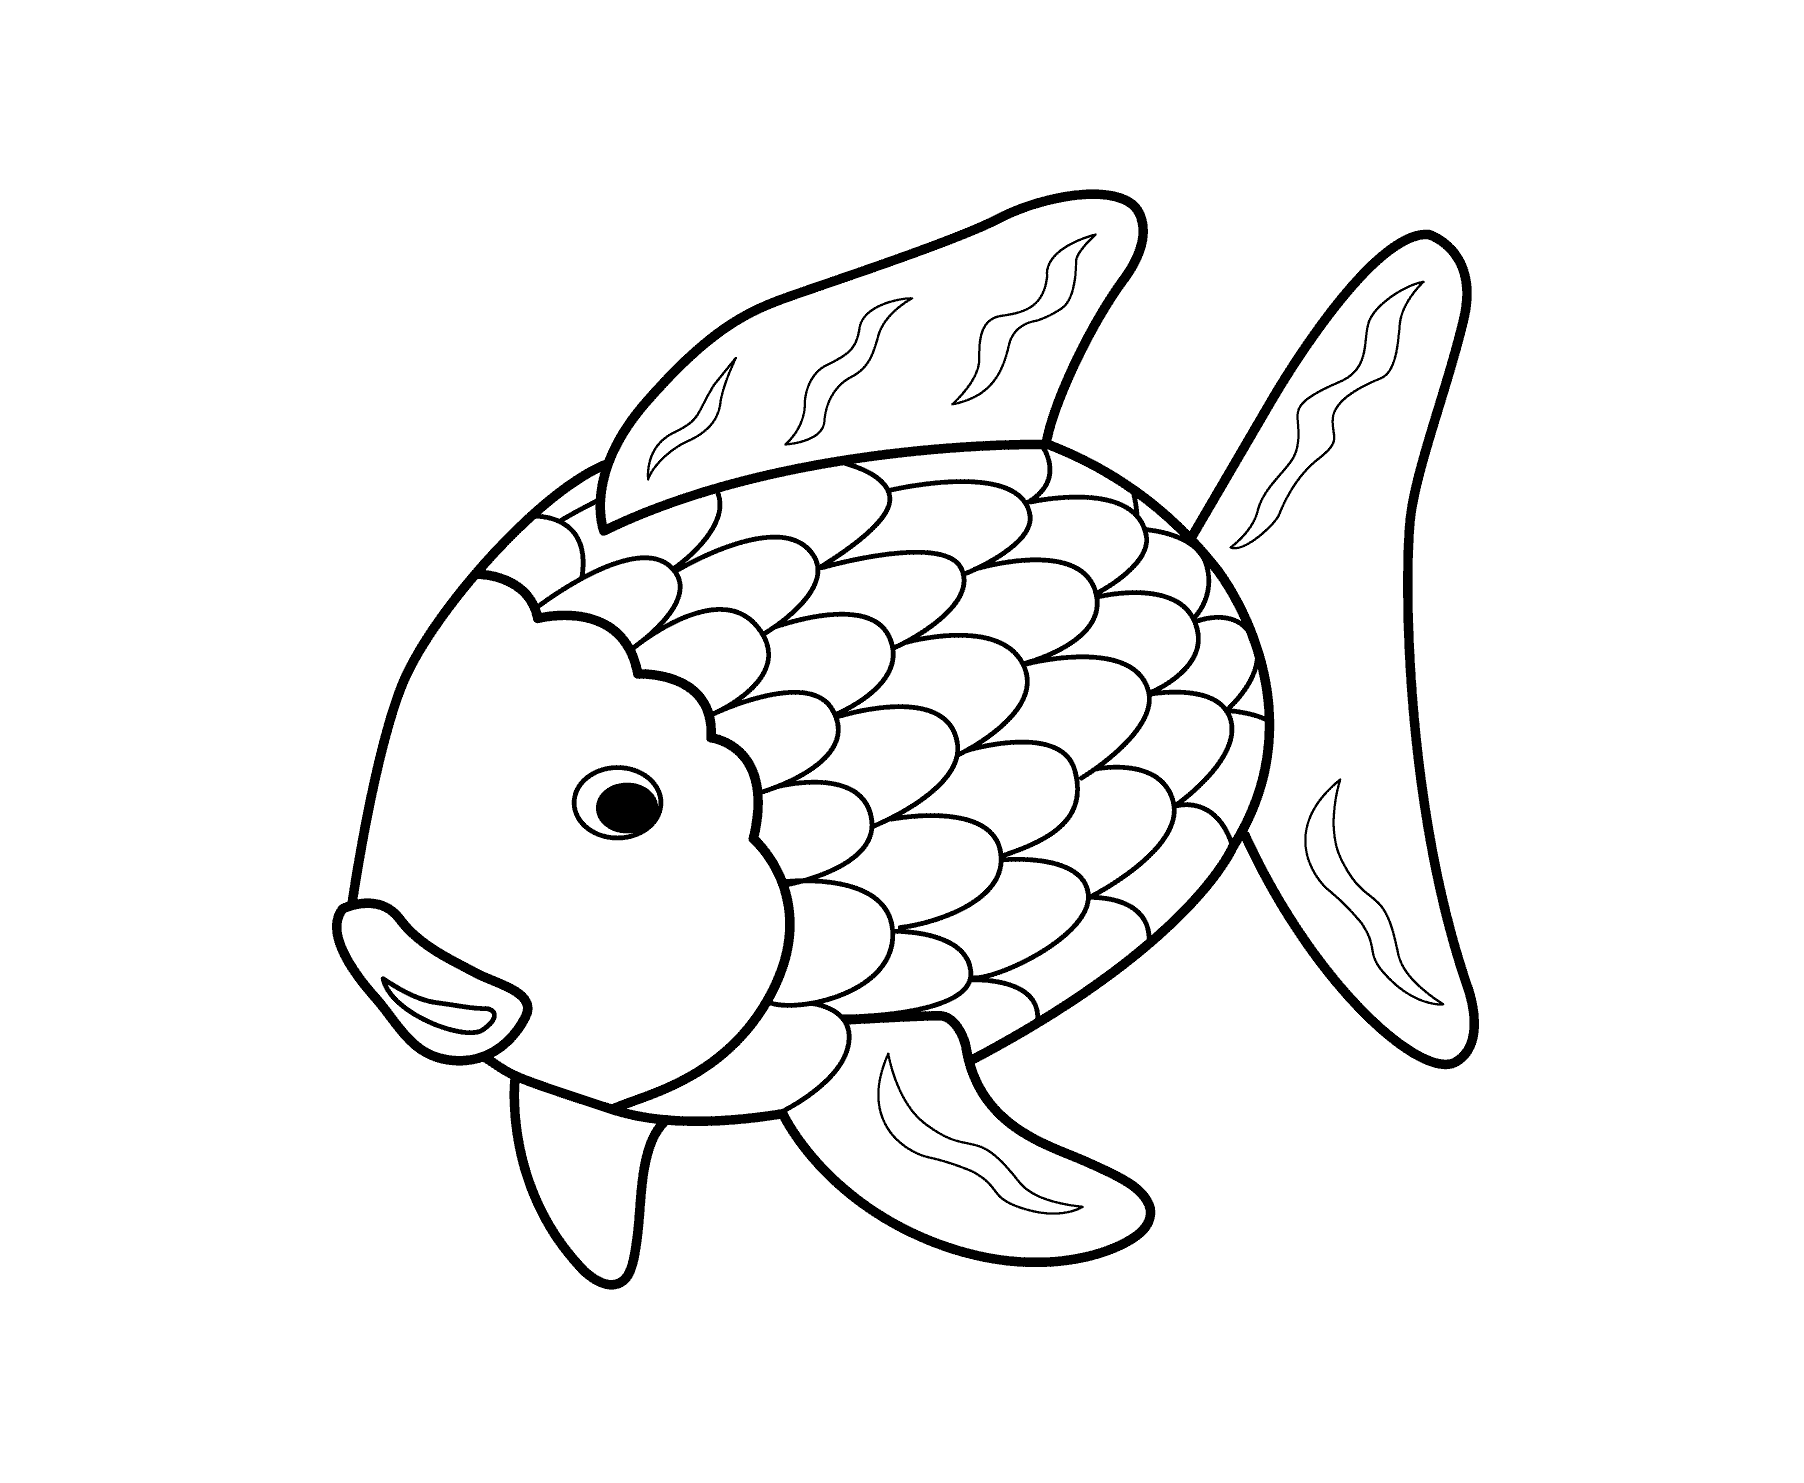 Rainbow Fish For Kids_ - Coloring Pages for Kids and for Adults